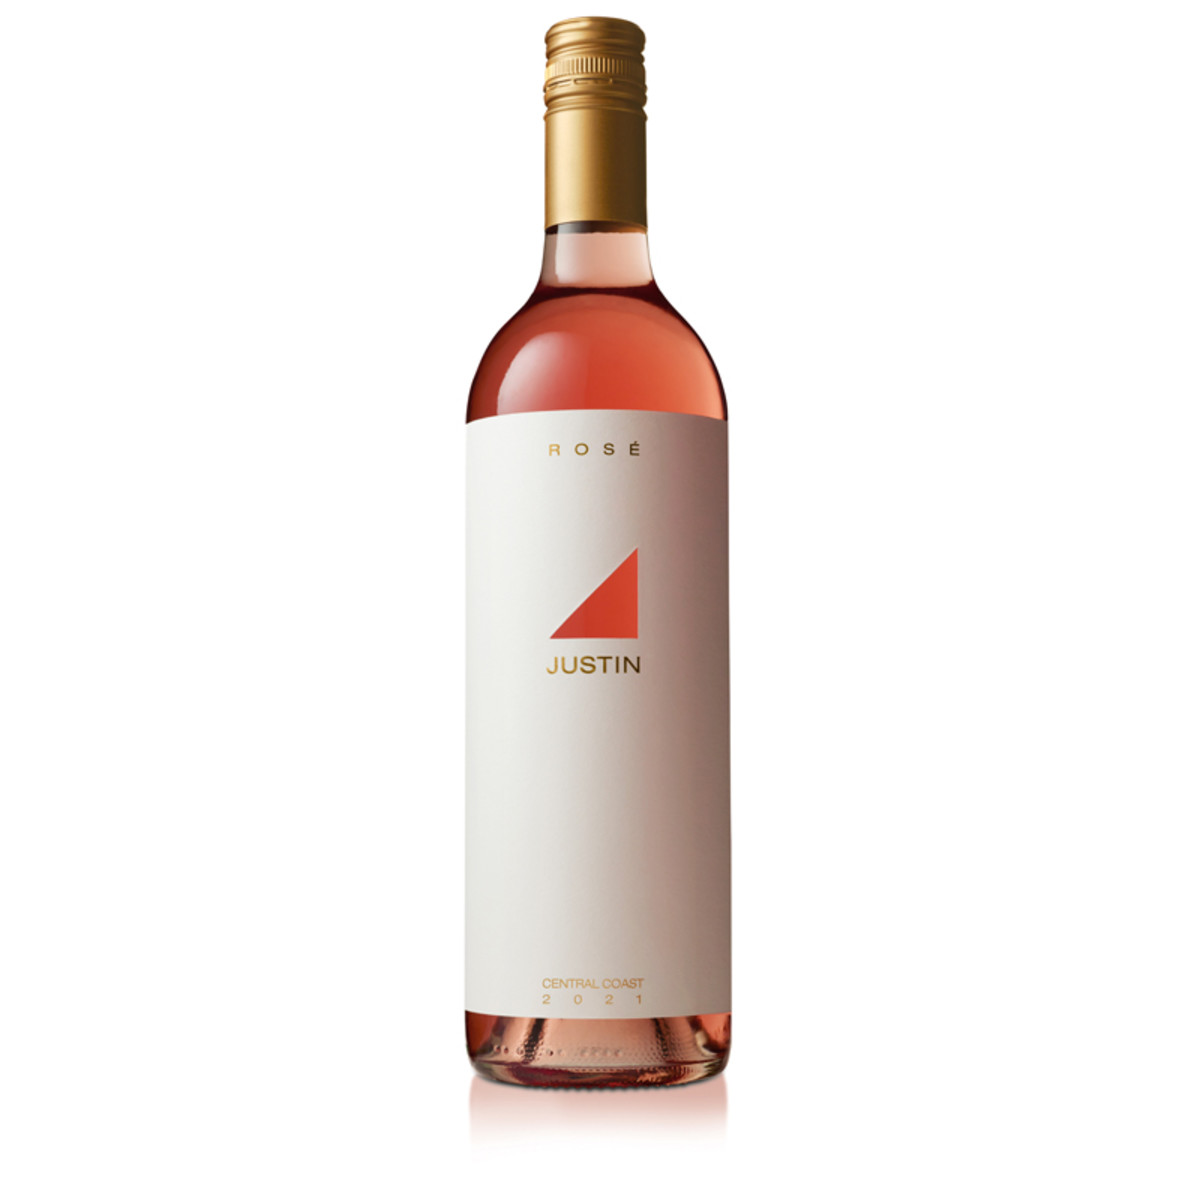 Sip the 2021 JUSTIN Rosé poolside, beachside, or just outside.